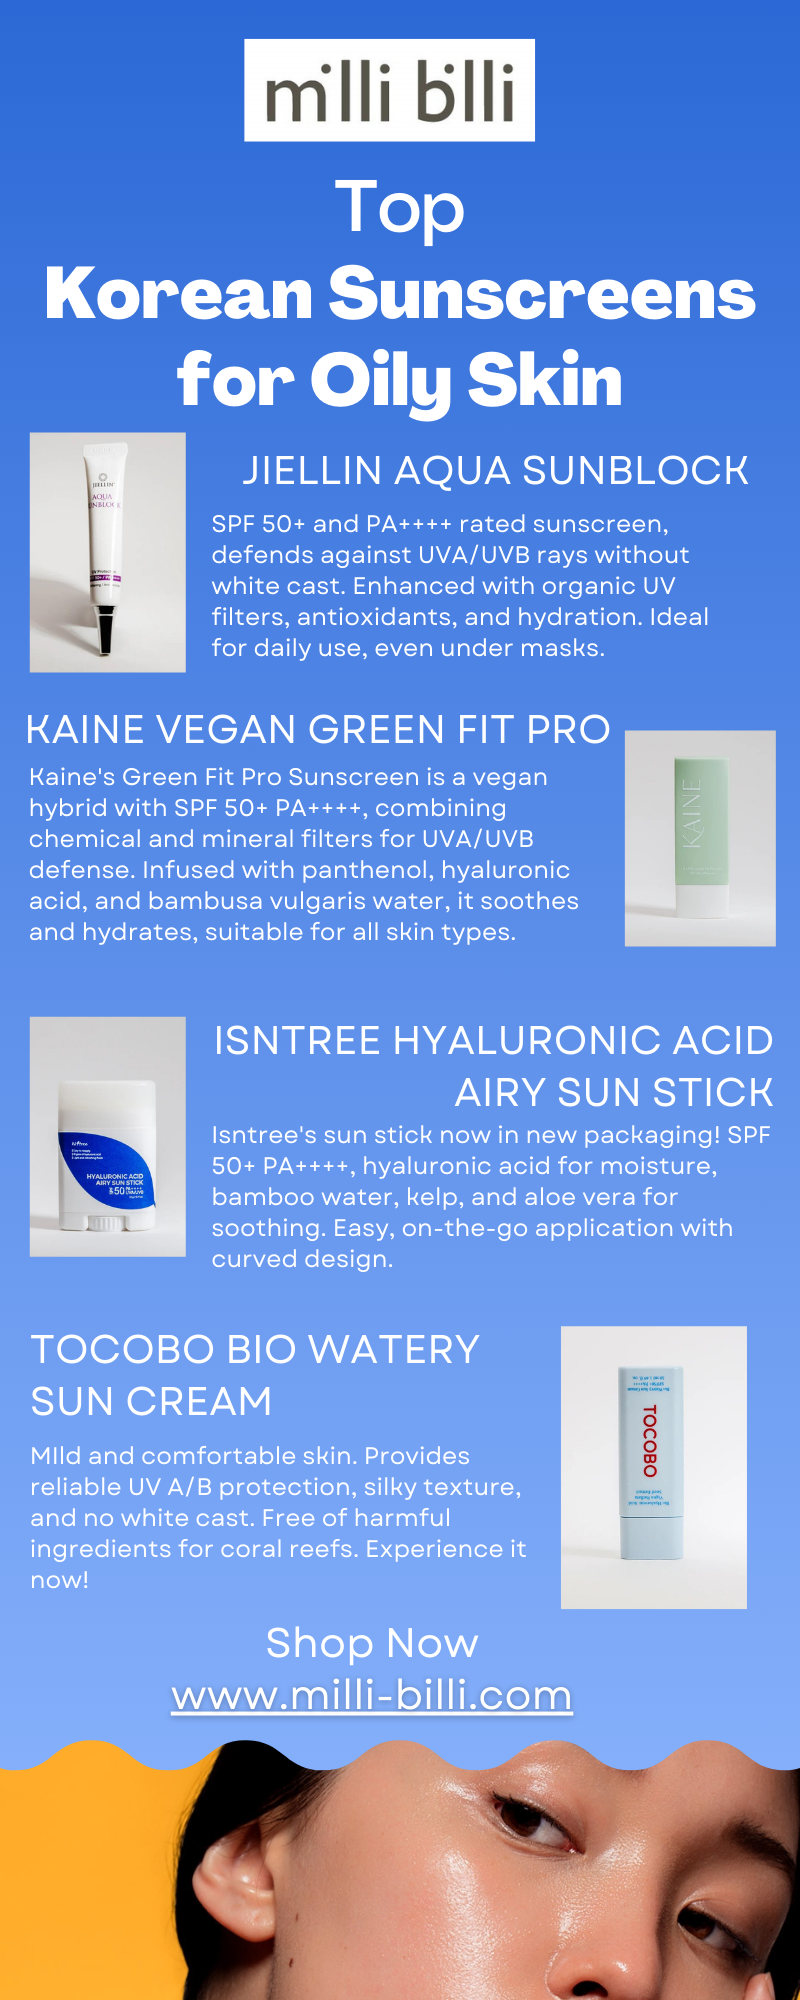 Top-Korean-Sunscreens-for-Oily-Skin hosted at ImgBB — ImgBB